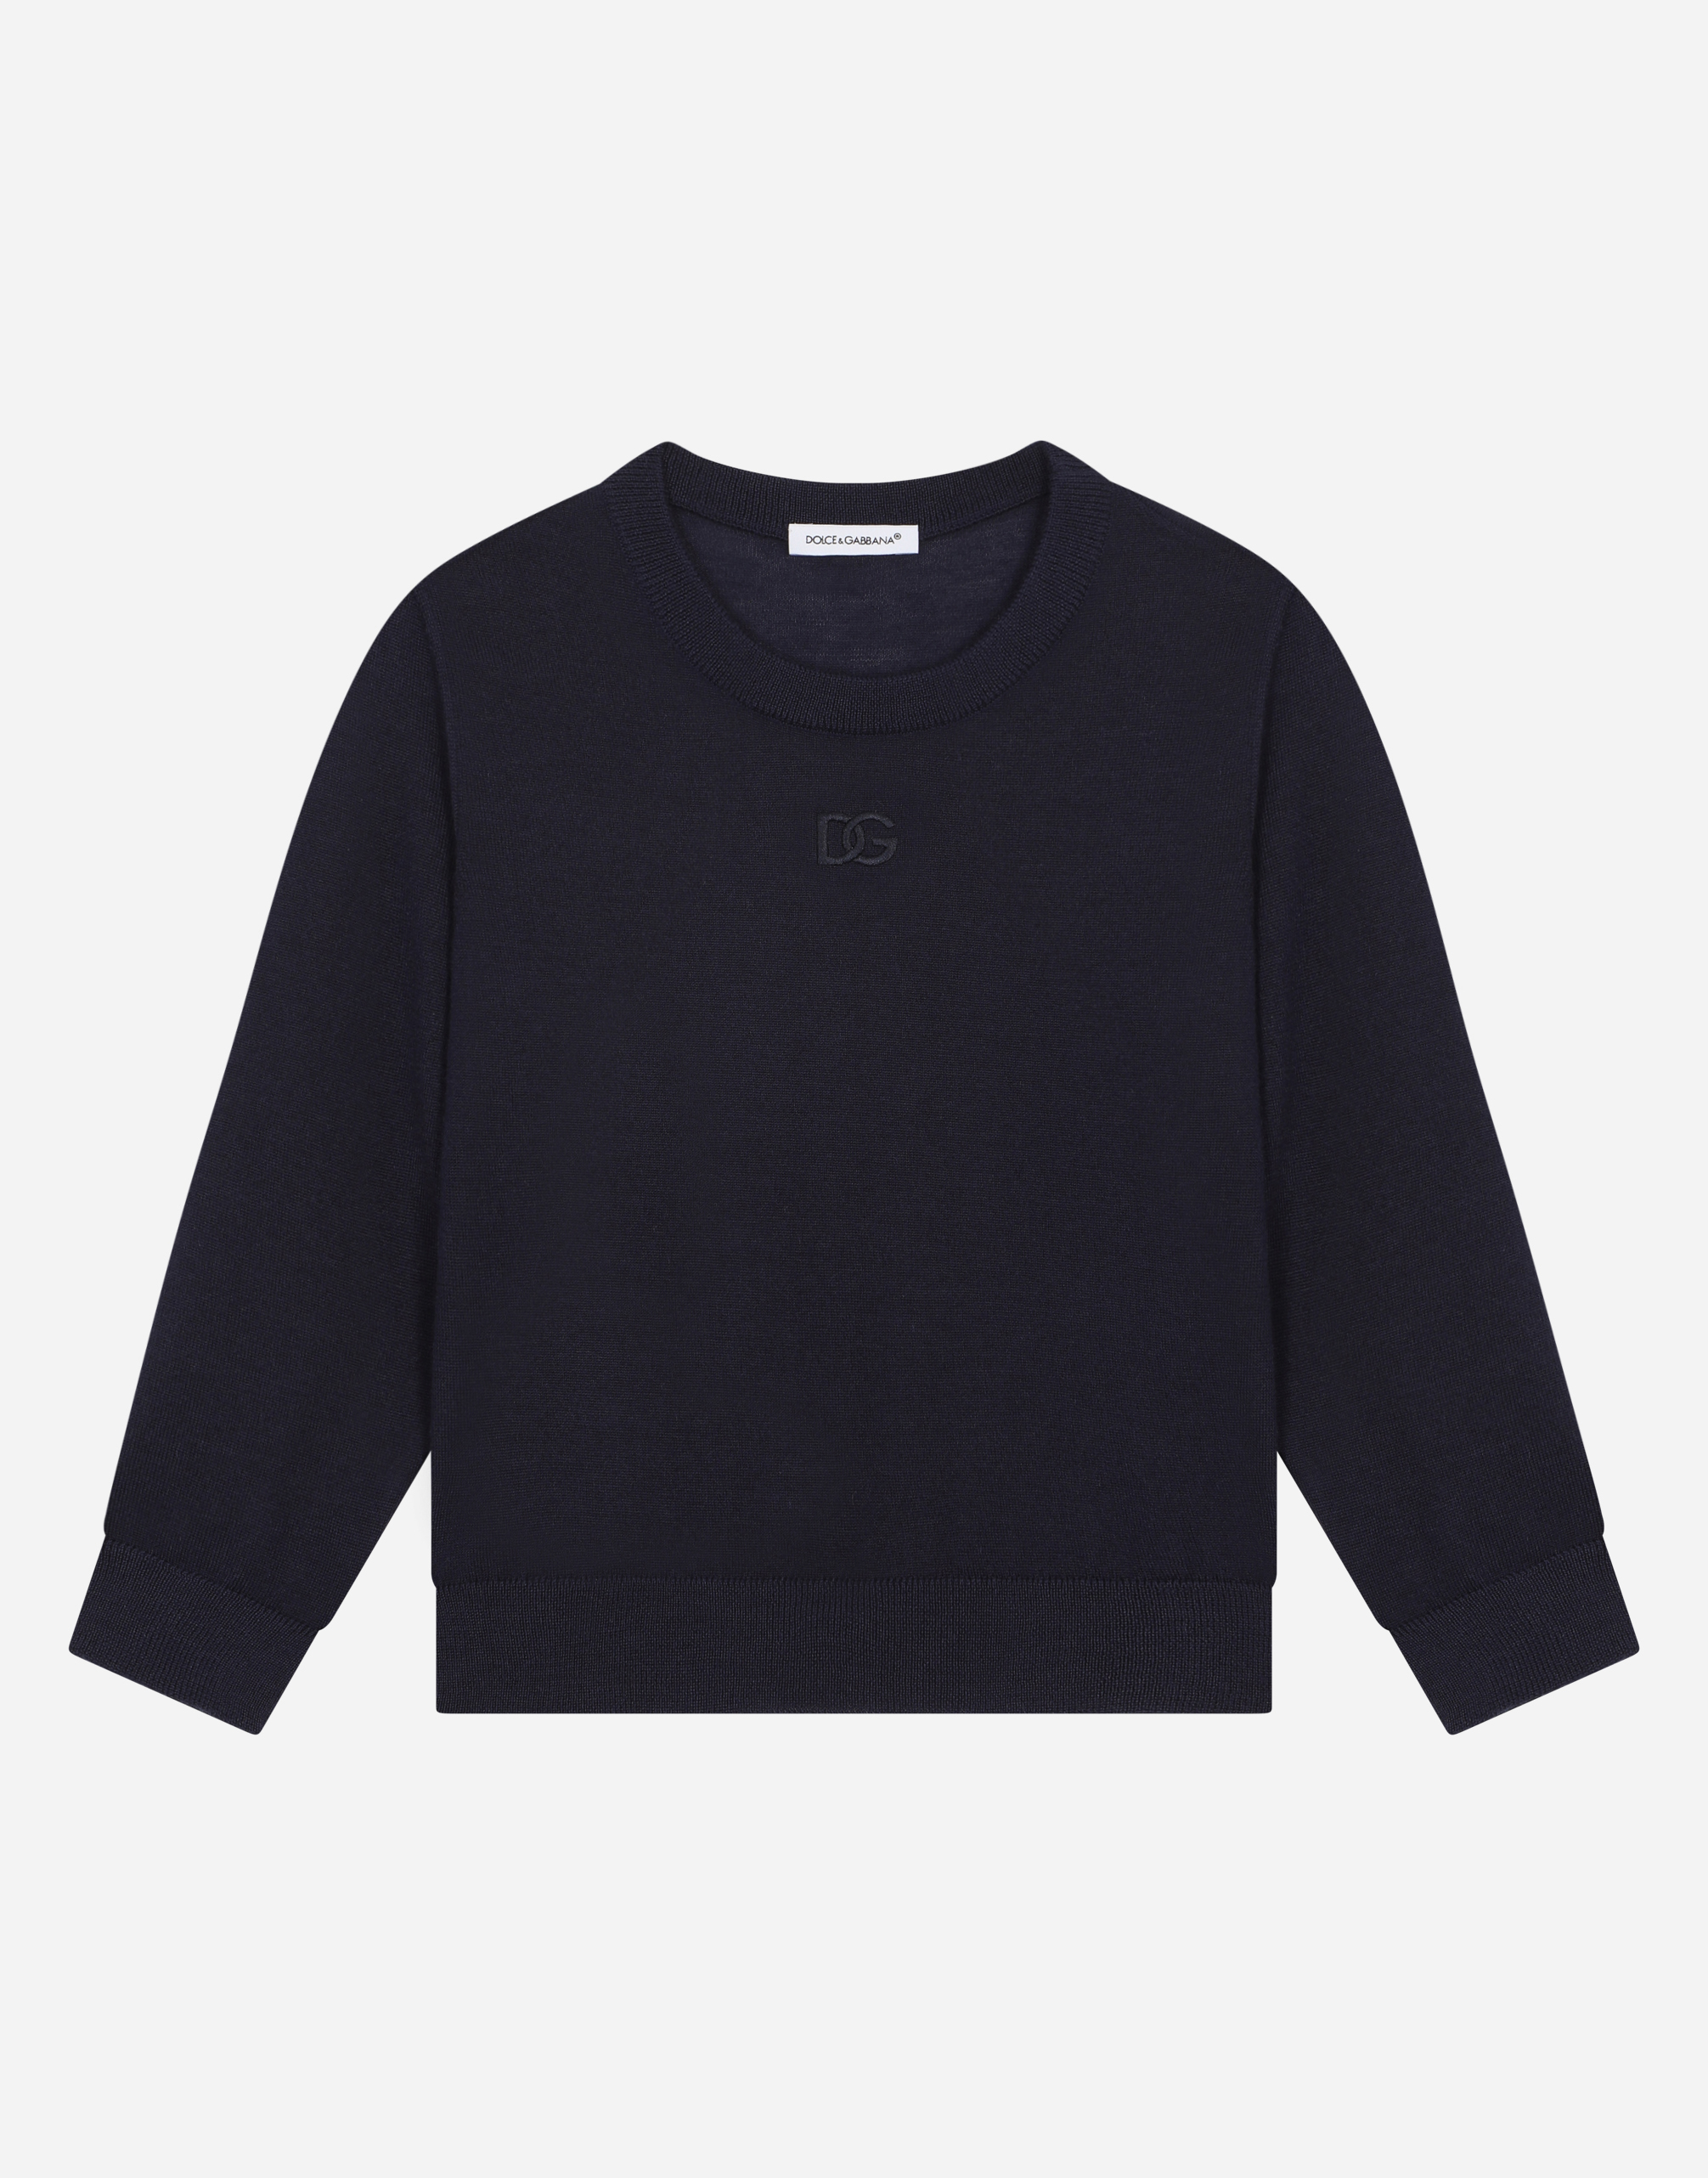 Cashmere round-neck sweater with DG logo embroidery in Blue